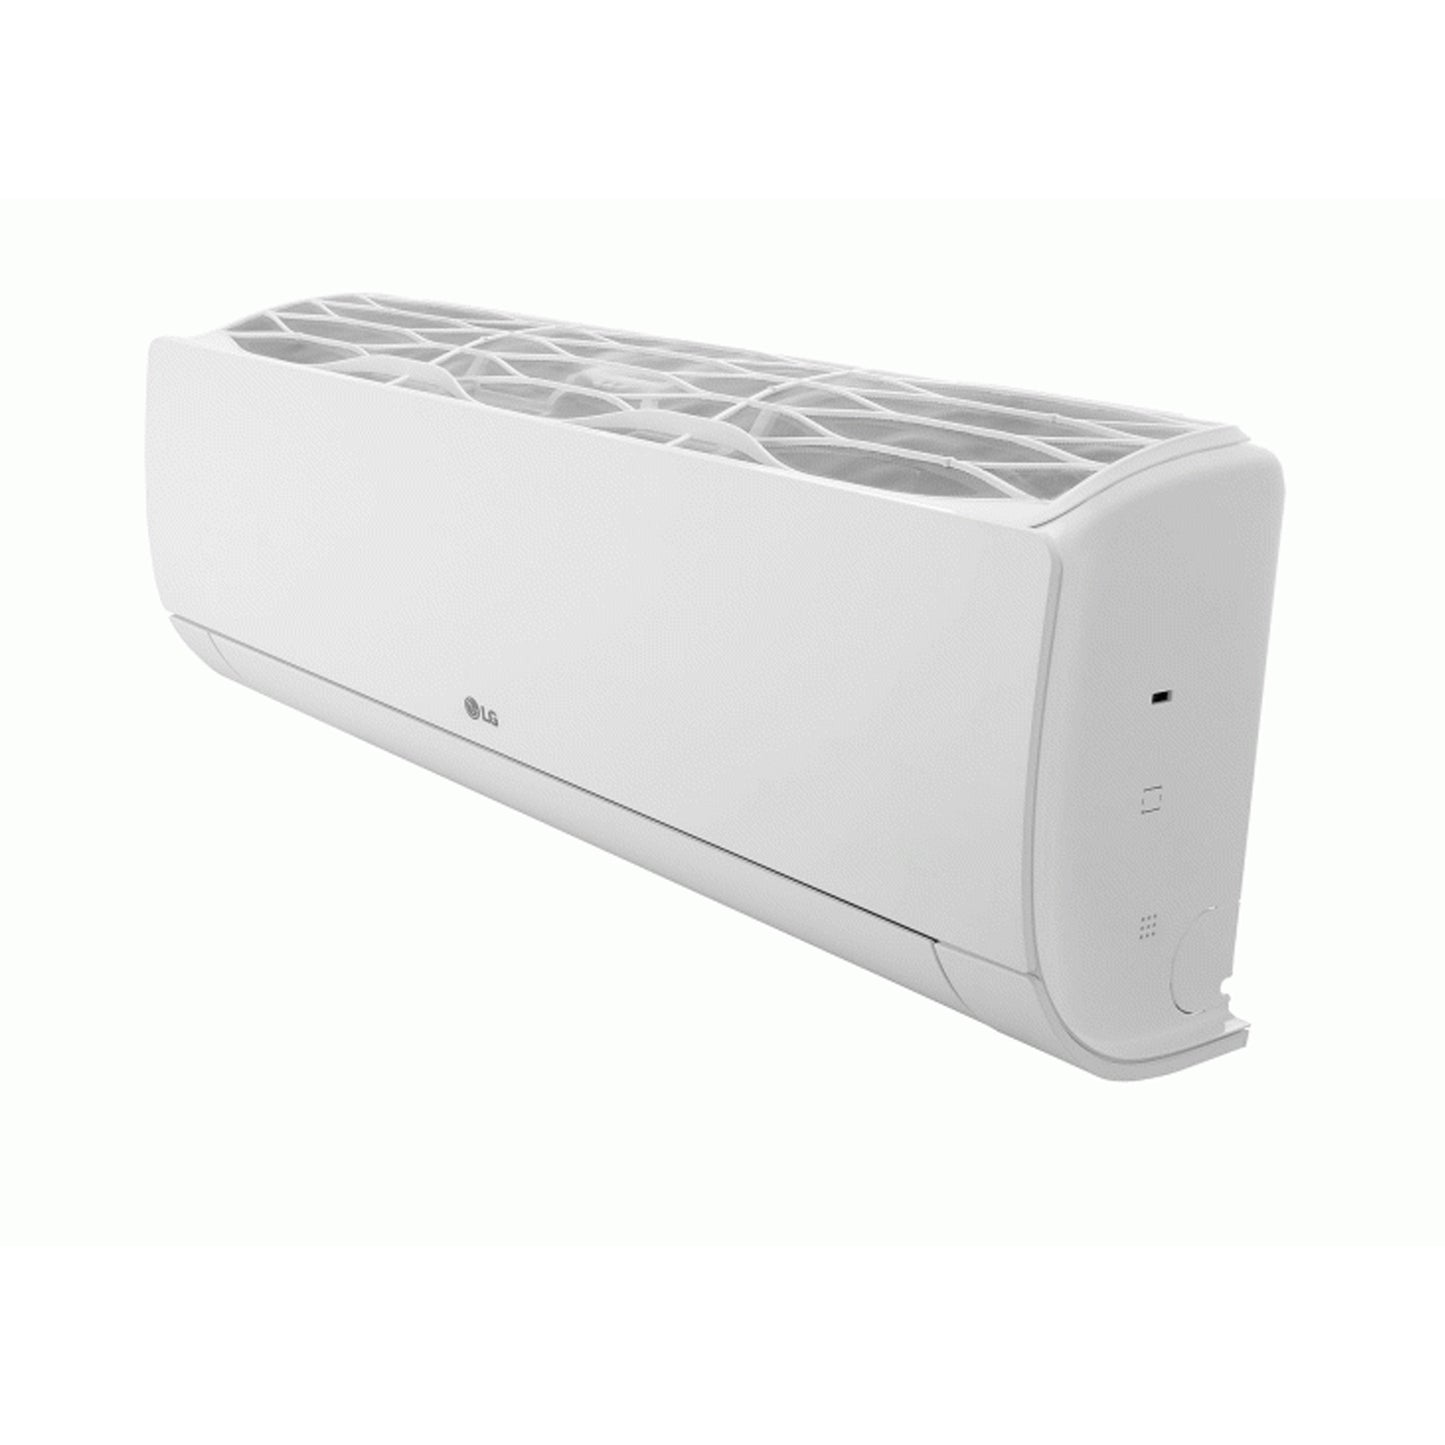 LG Basic Dual Inverter Split AC 1.5HP : Advanced Features for Comfort